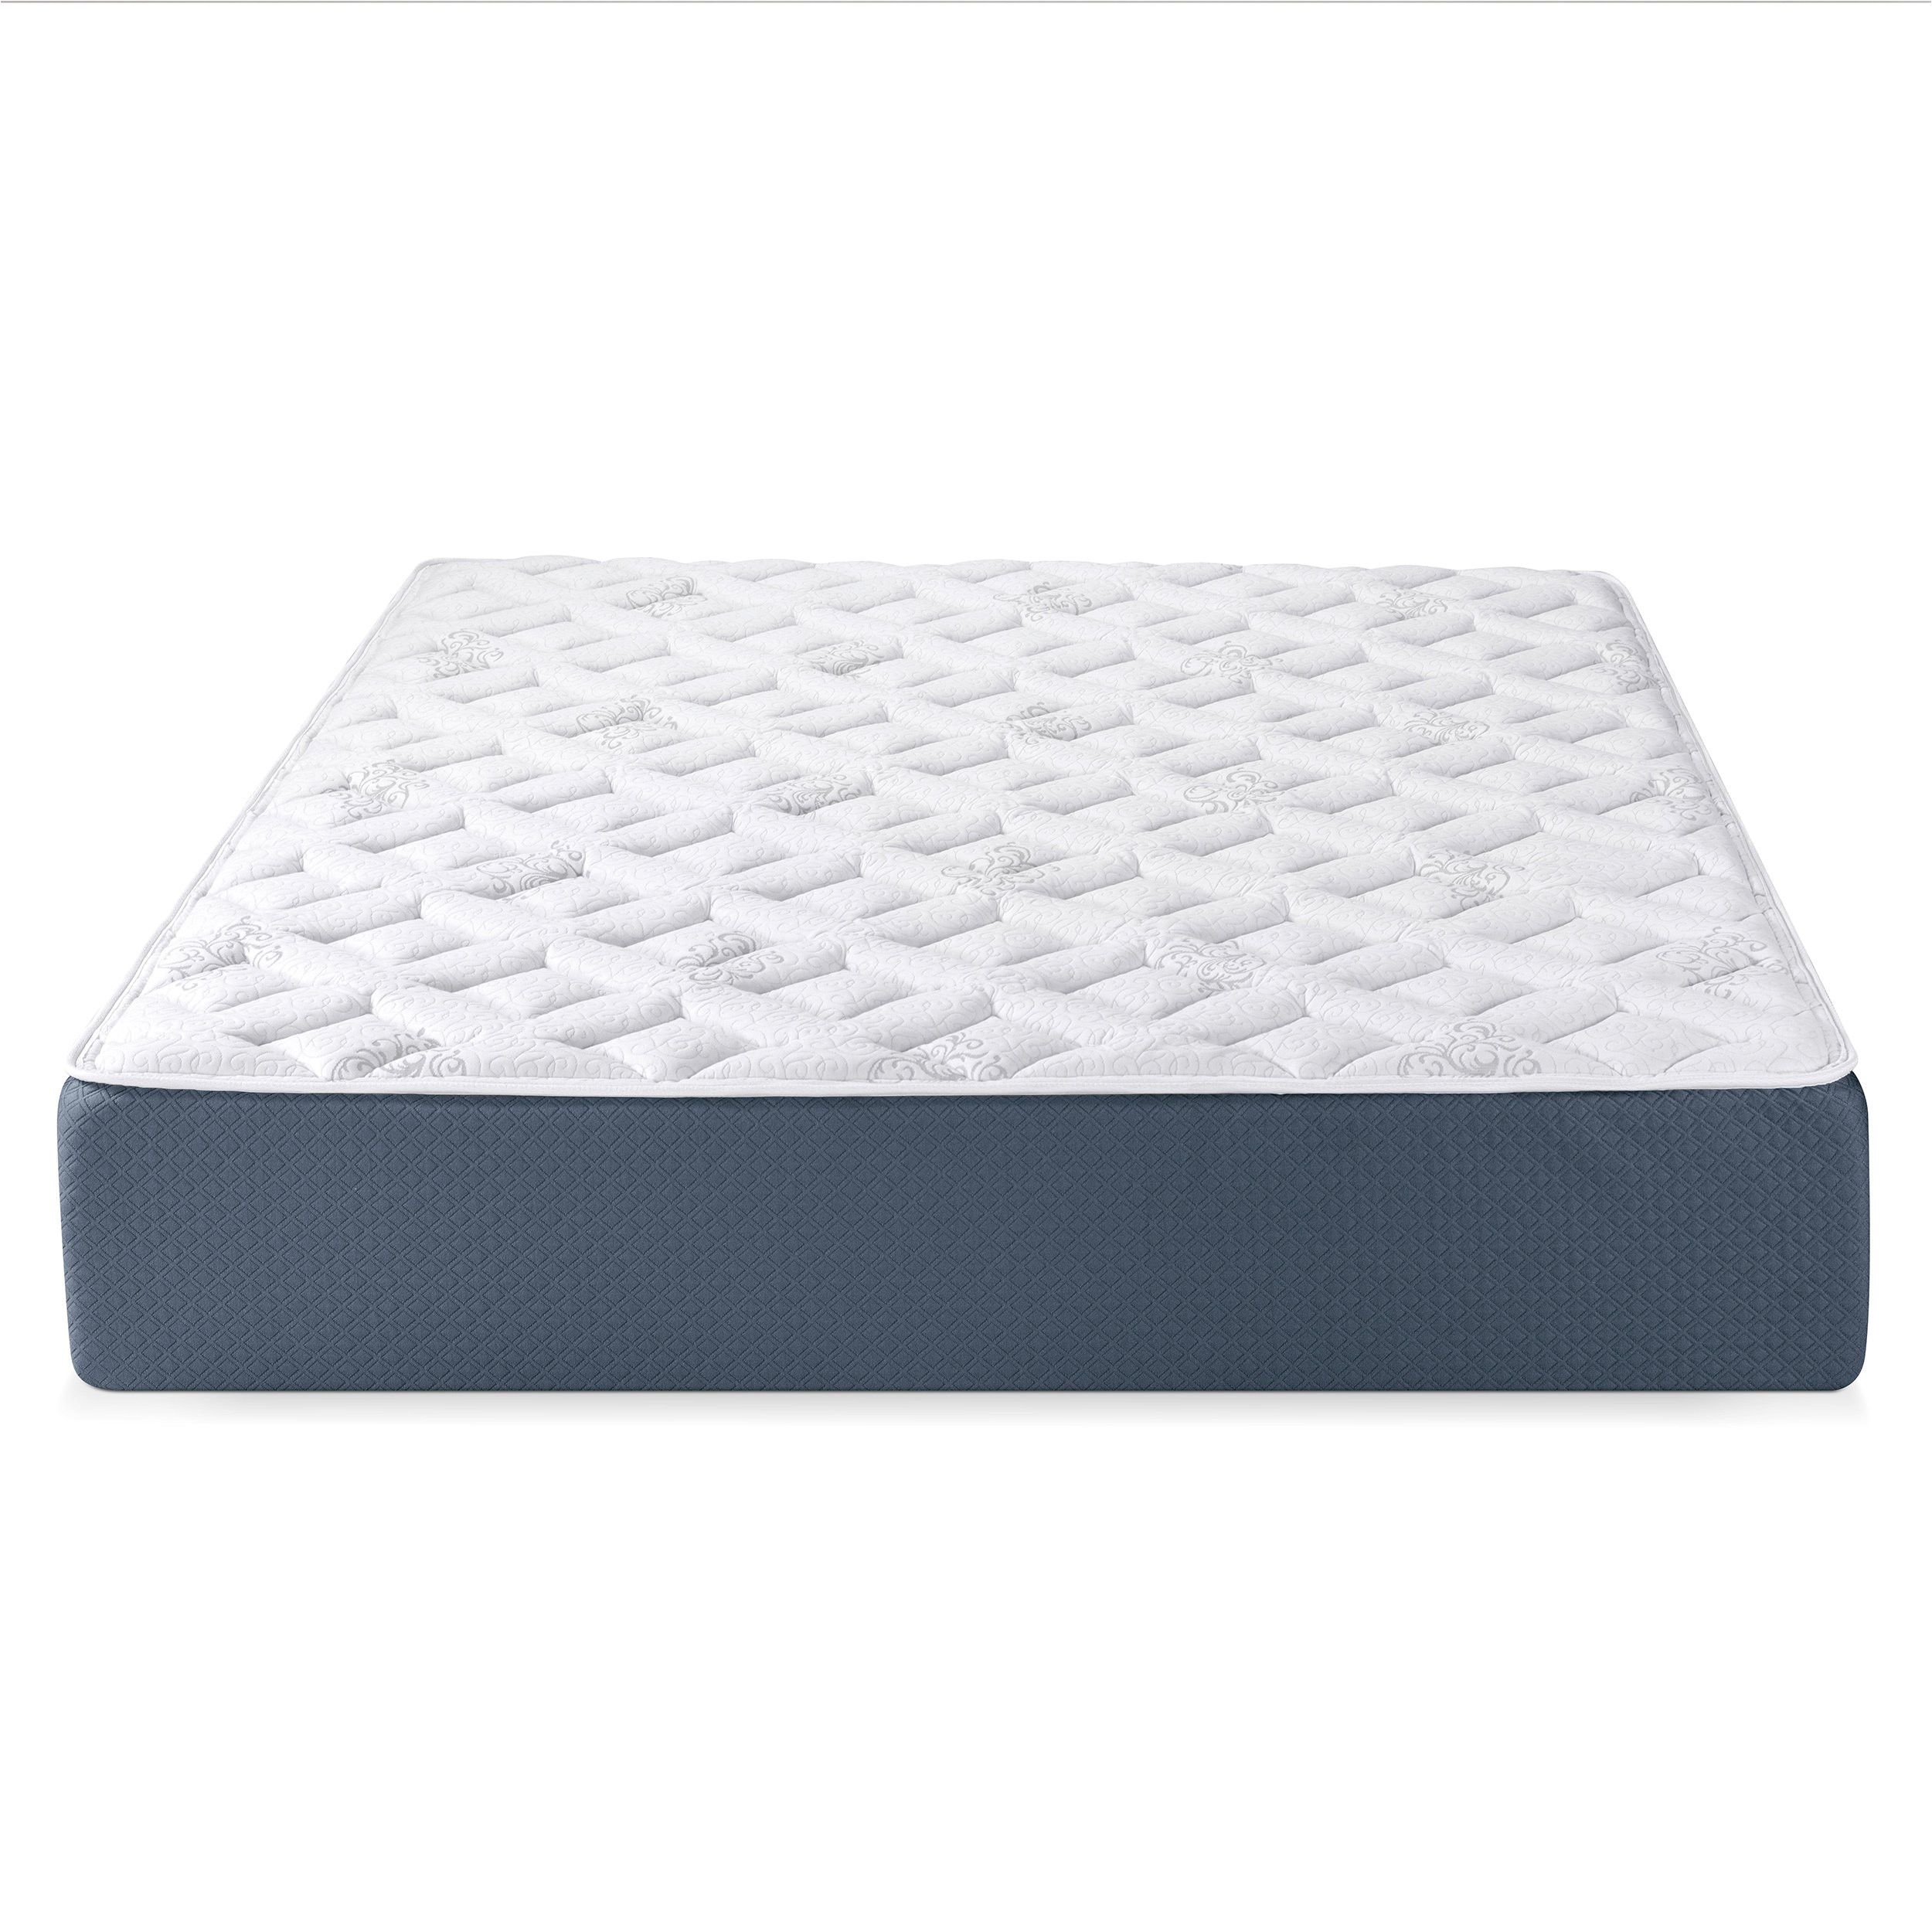 shop select luxury 14 inch queen size quilted airflow gel memory foam mattress on sale free shipping today overstock com 14404461